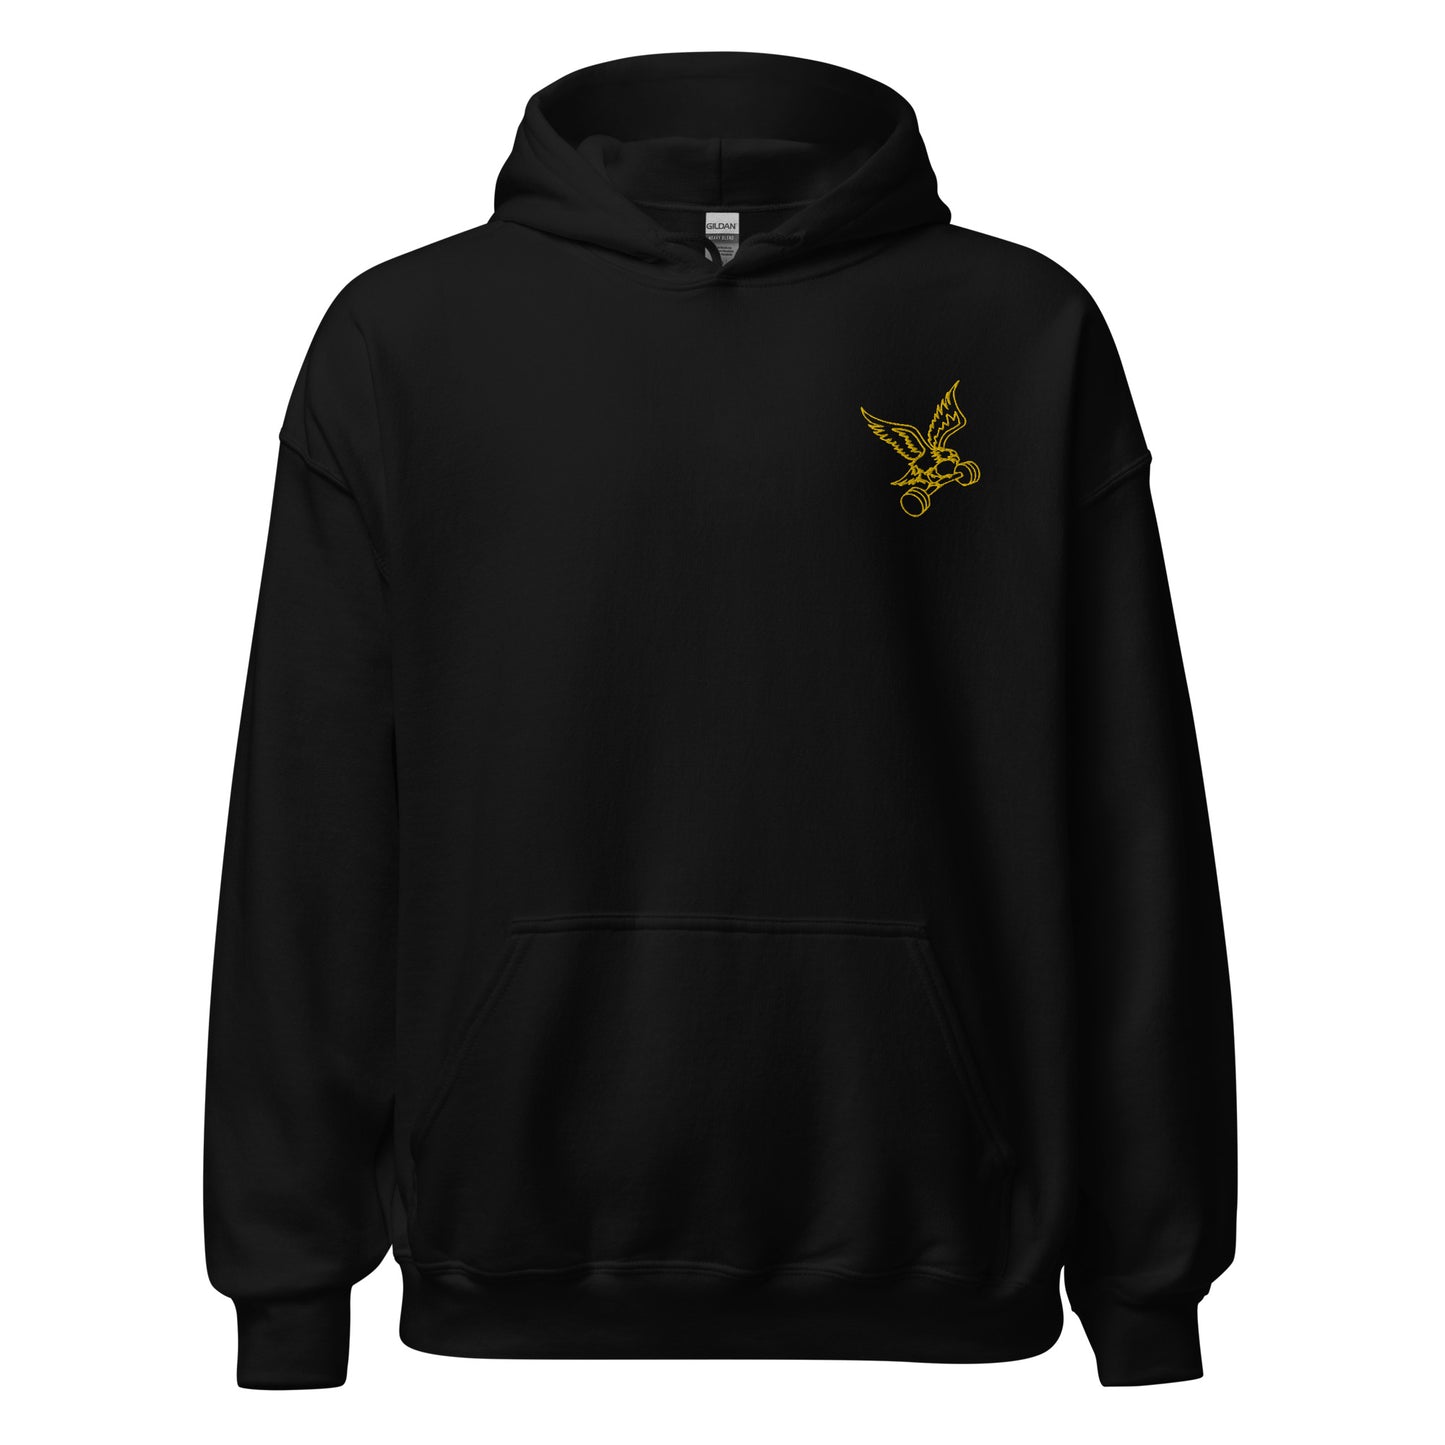 Embroidered Barbell Eagle Hoodie in Black